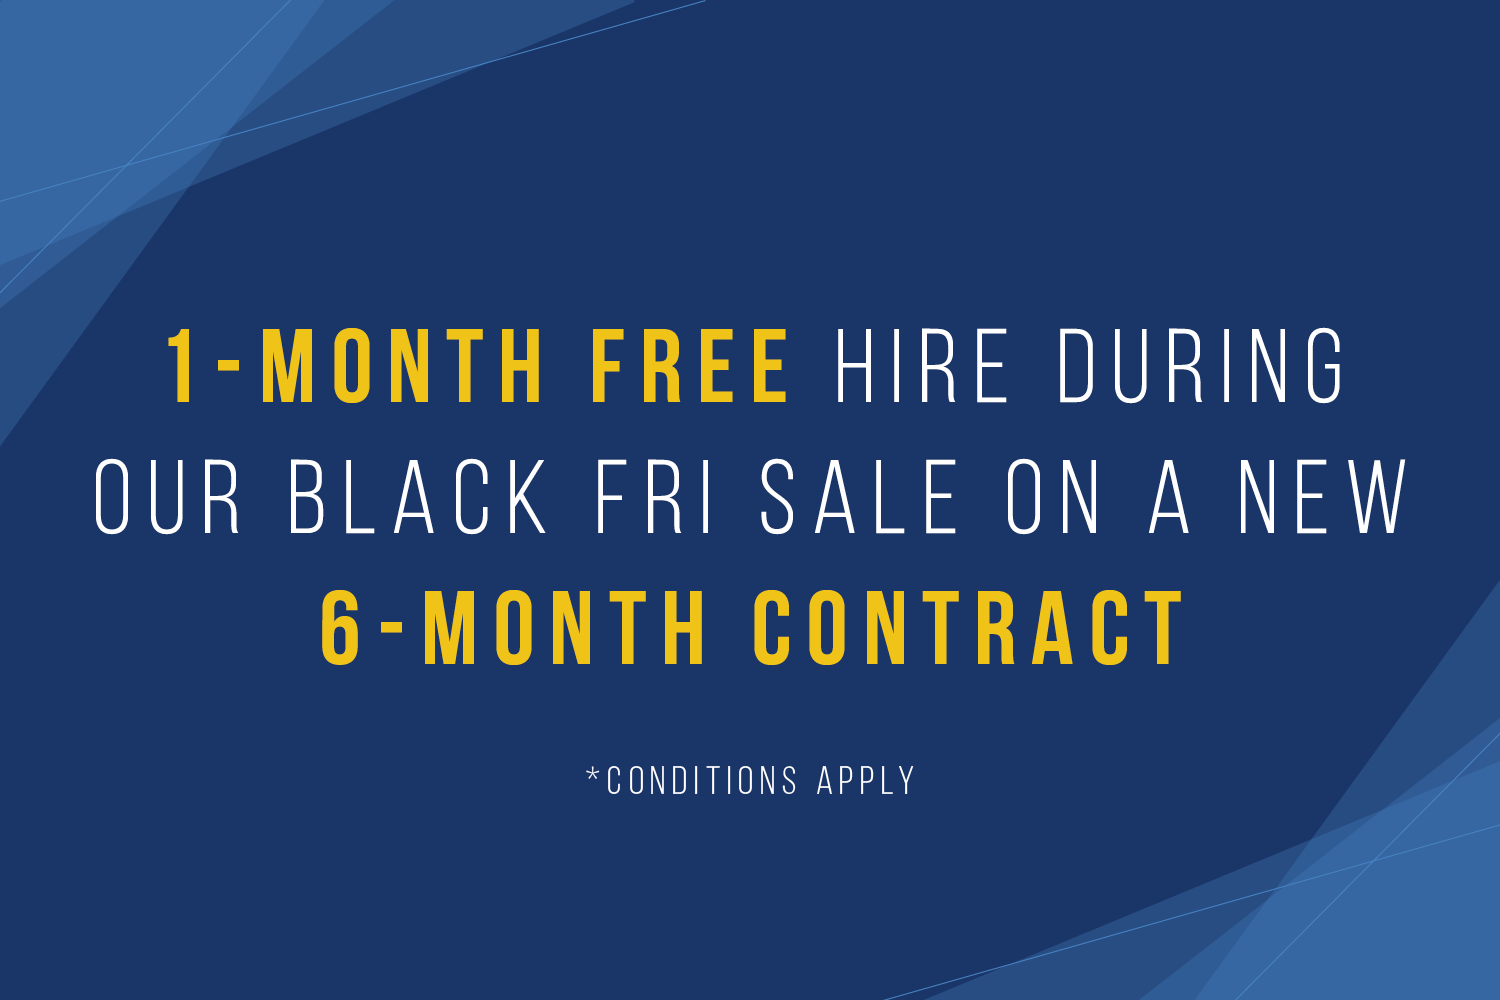 1-month free hire during our Black Friday sale on a new 6-month contract. Conditions apply.